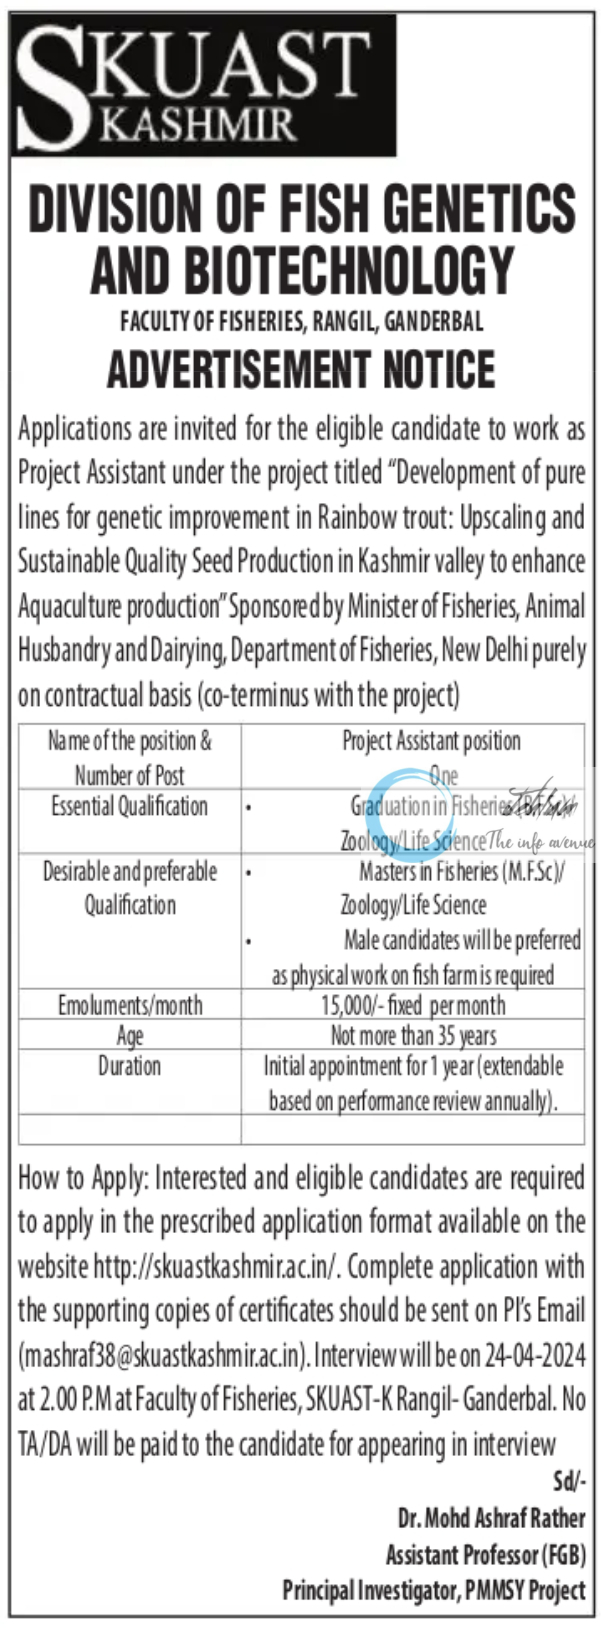 SKUAST KASHMIR DIVISION OF FISH GENETICS AND BIOTECHNOLOGY FACULTY OF FISHERIES ADVERTISEMENT NOTICE 2024